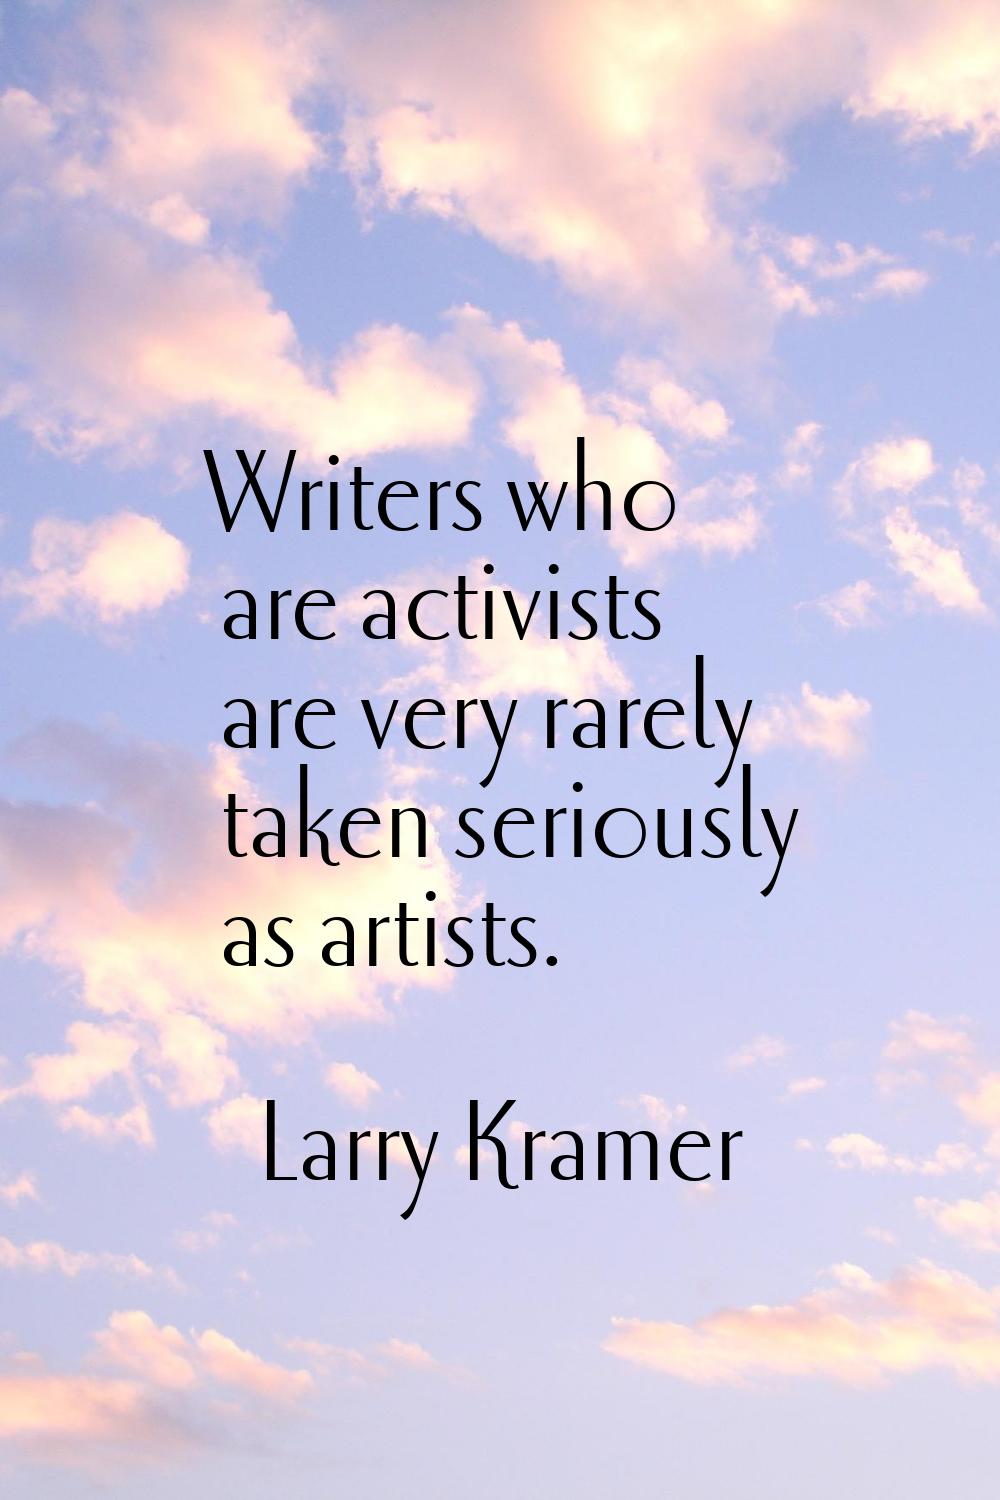 Writers who are activists are very rarely taken seriously as artists.